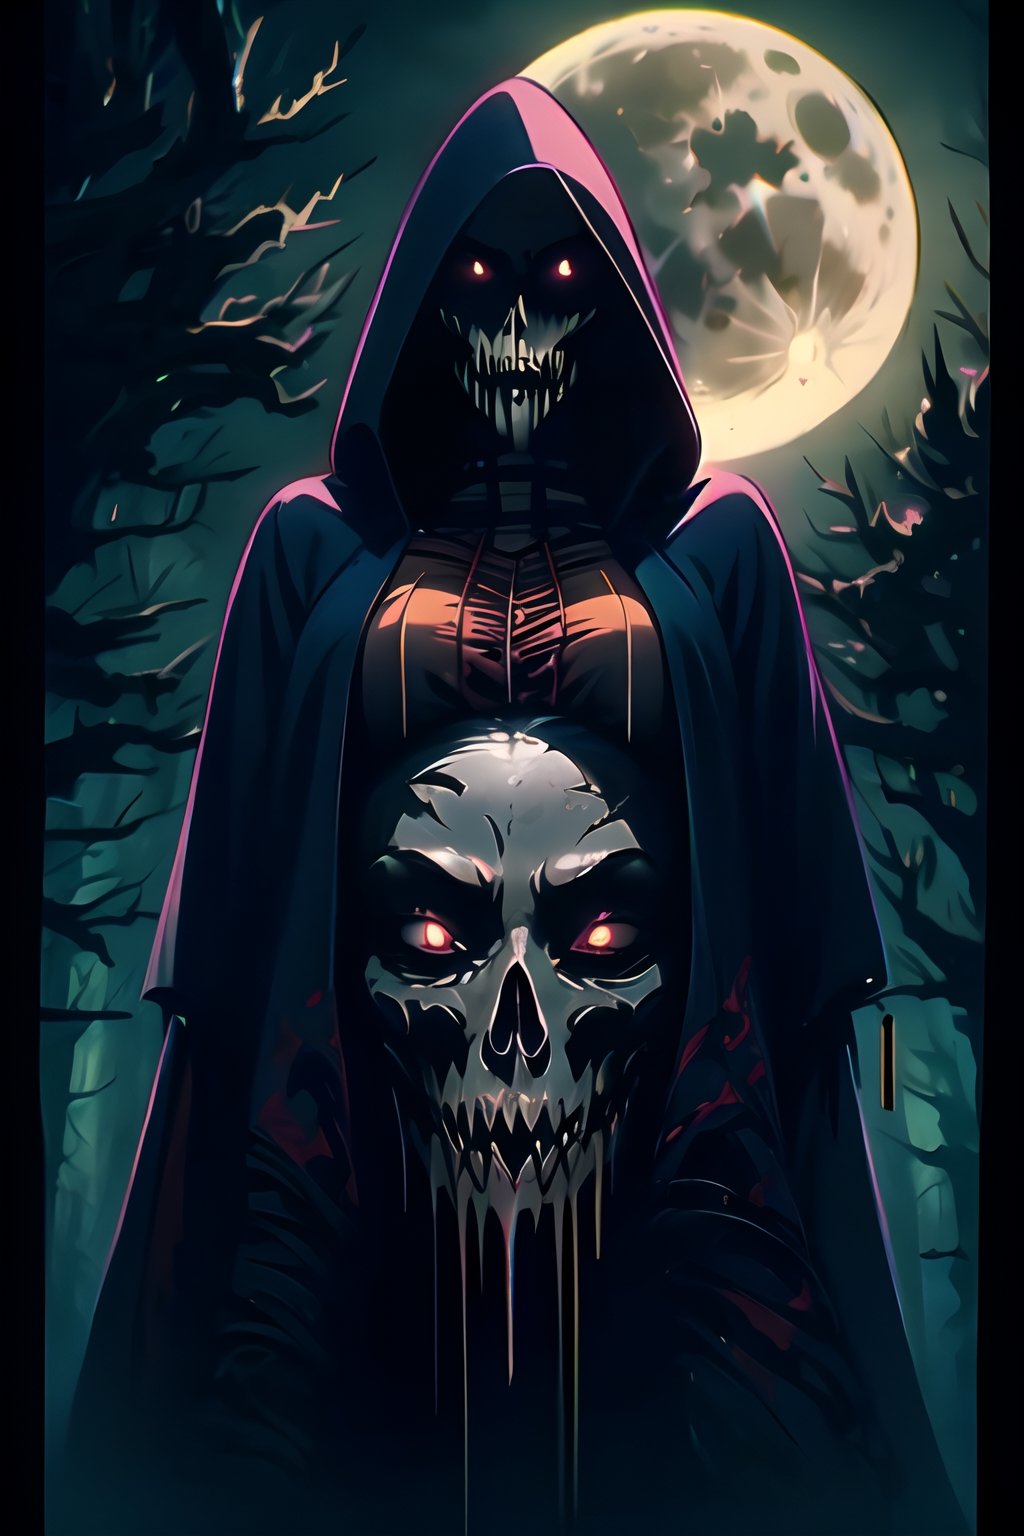 Masterpiece, Best Quality, vampire. Ominous hooded, looming with blade, gothic forest, full moon, Halloween theme, inking flow, splahs art, UHD, HDR